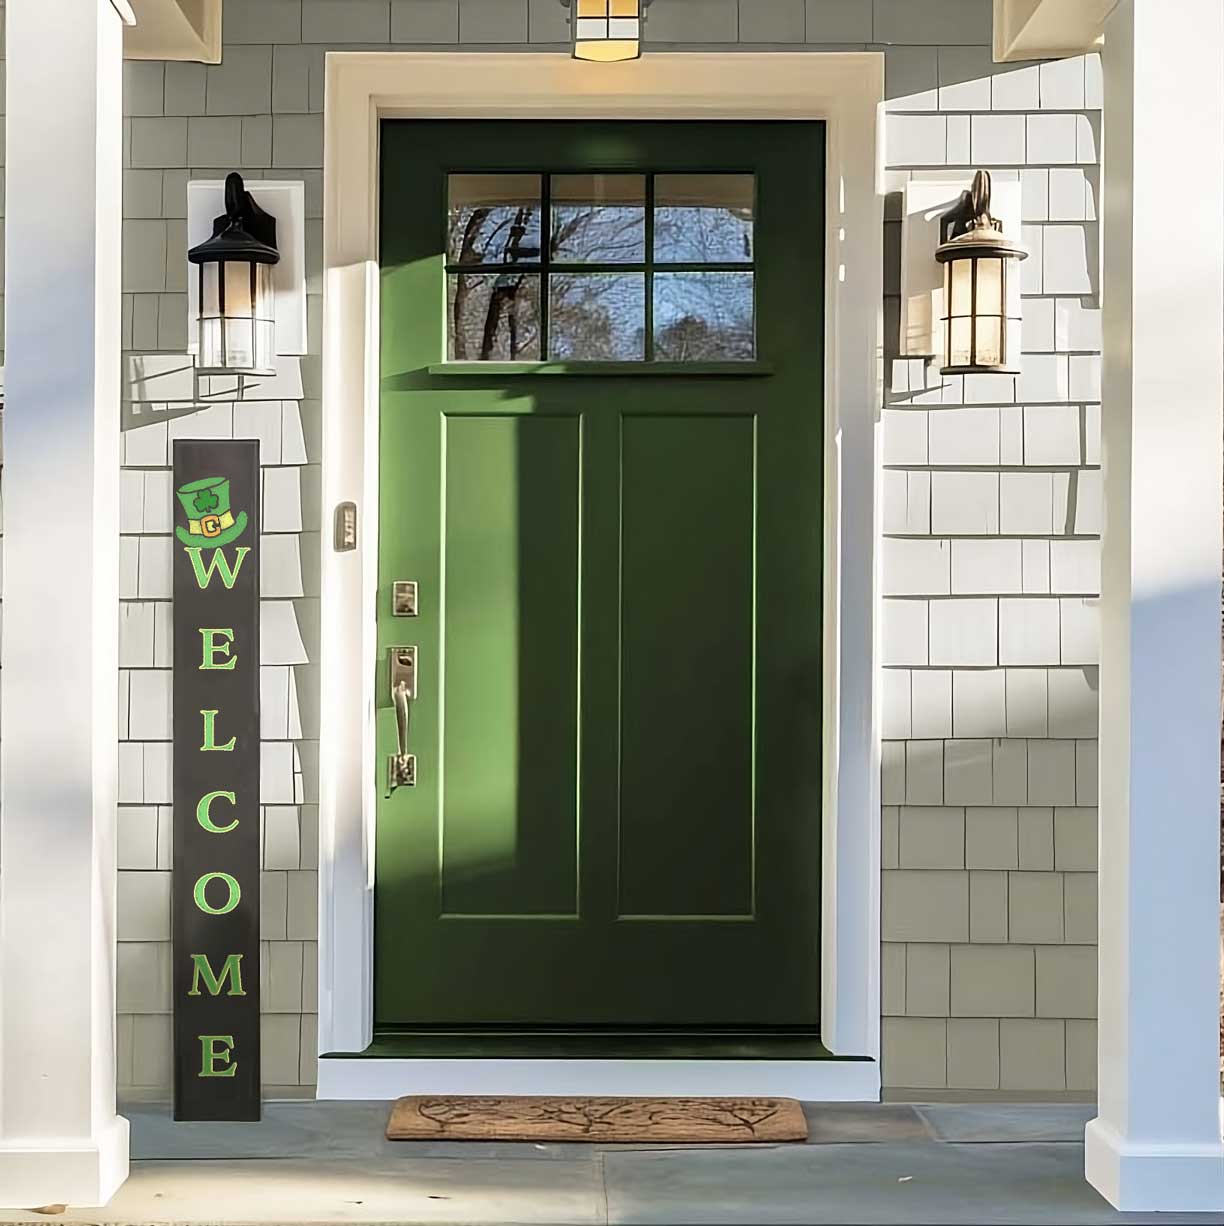 St. Patrick's Day Vertical Welcome Sign Chalkboard Porch Sign with leprechaun hat crafted with chalkboard stencils by Plata Chalkboards